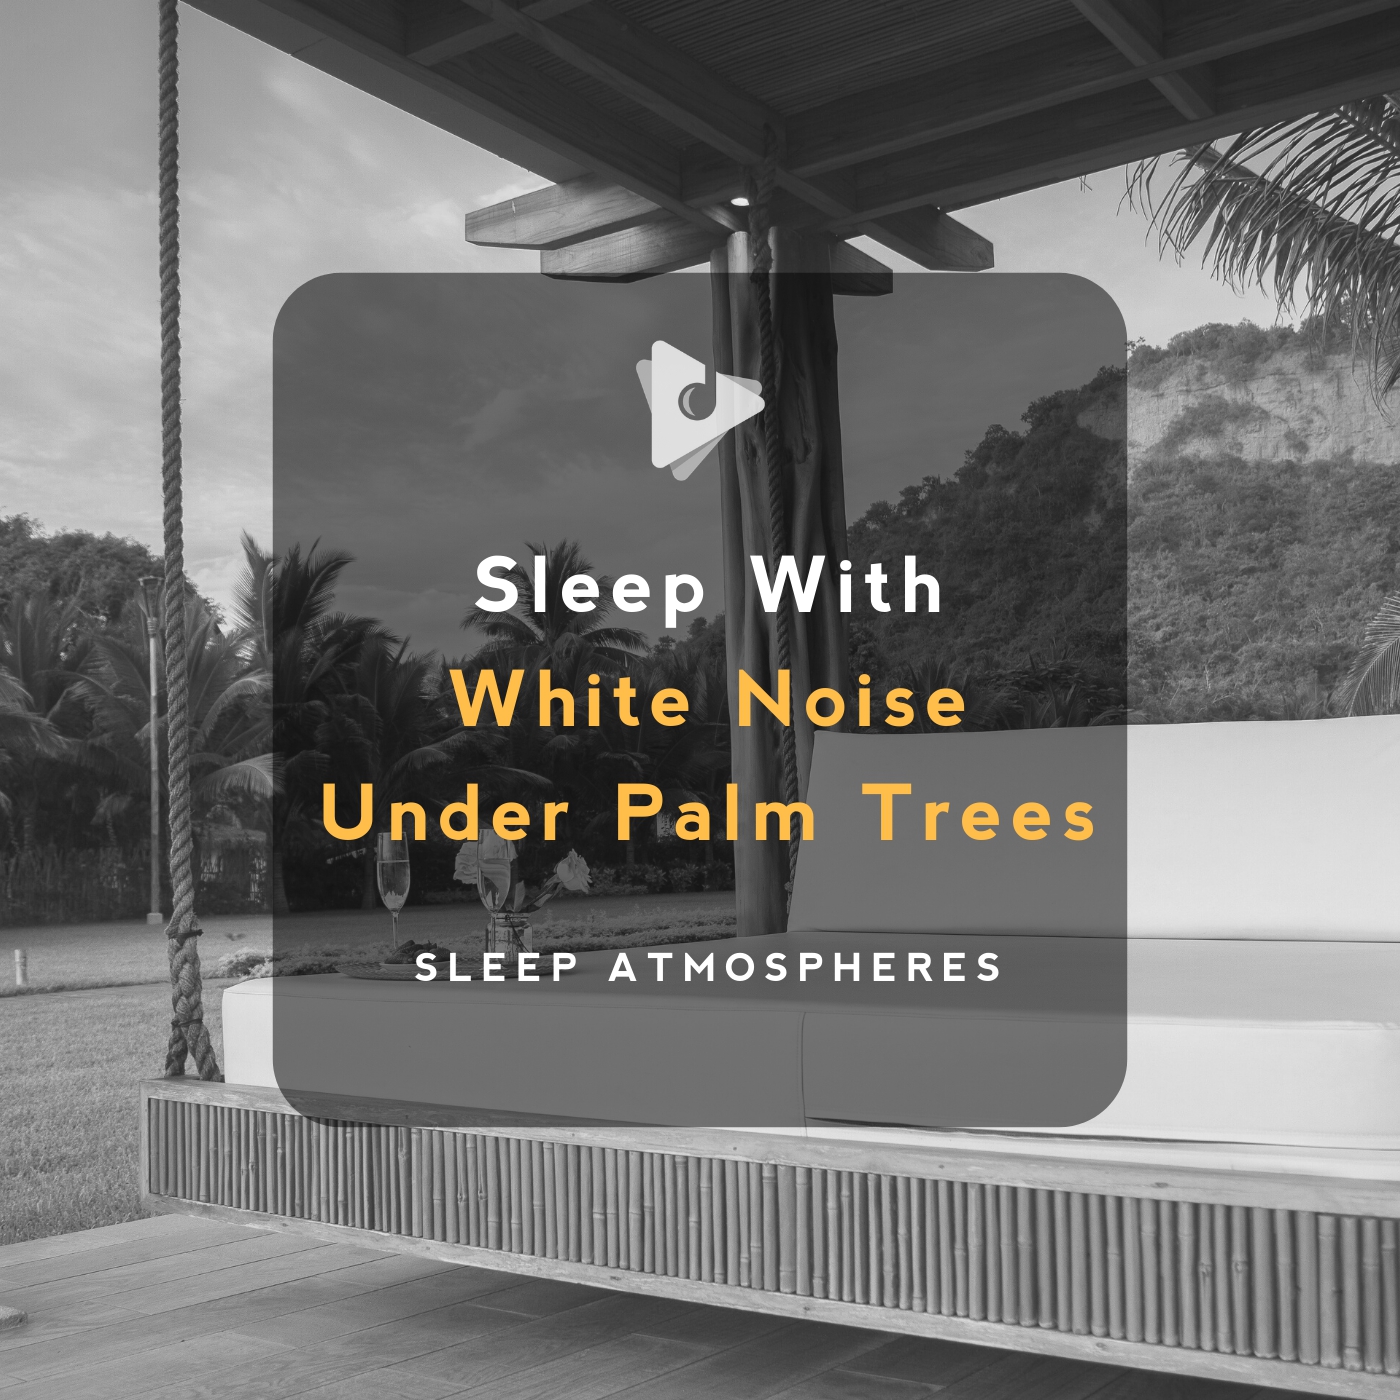 Sleep With White Noise Under Palm Trees